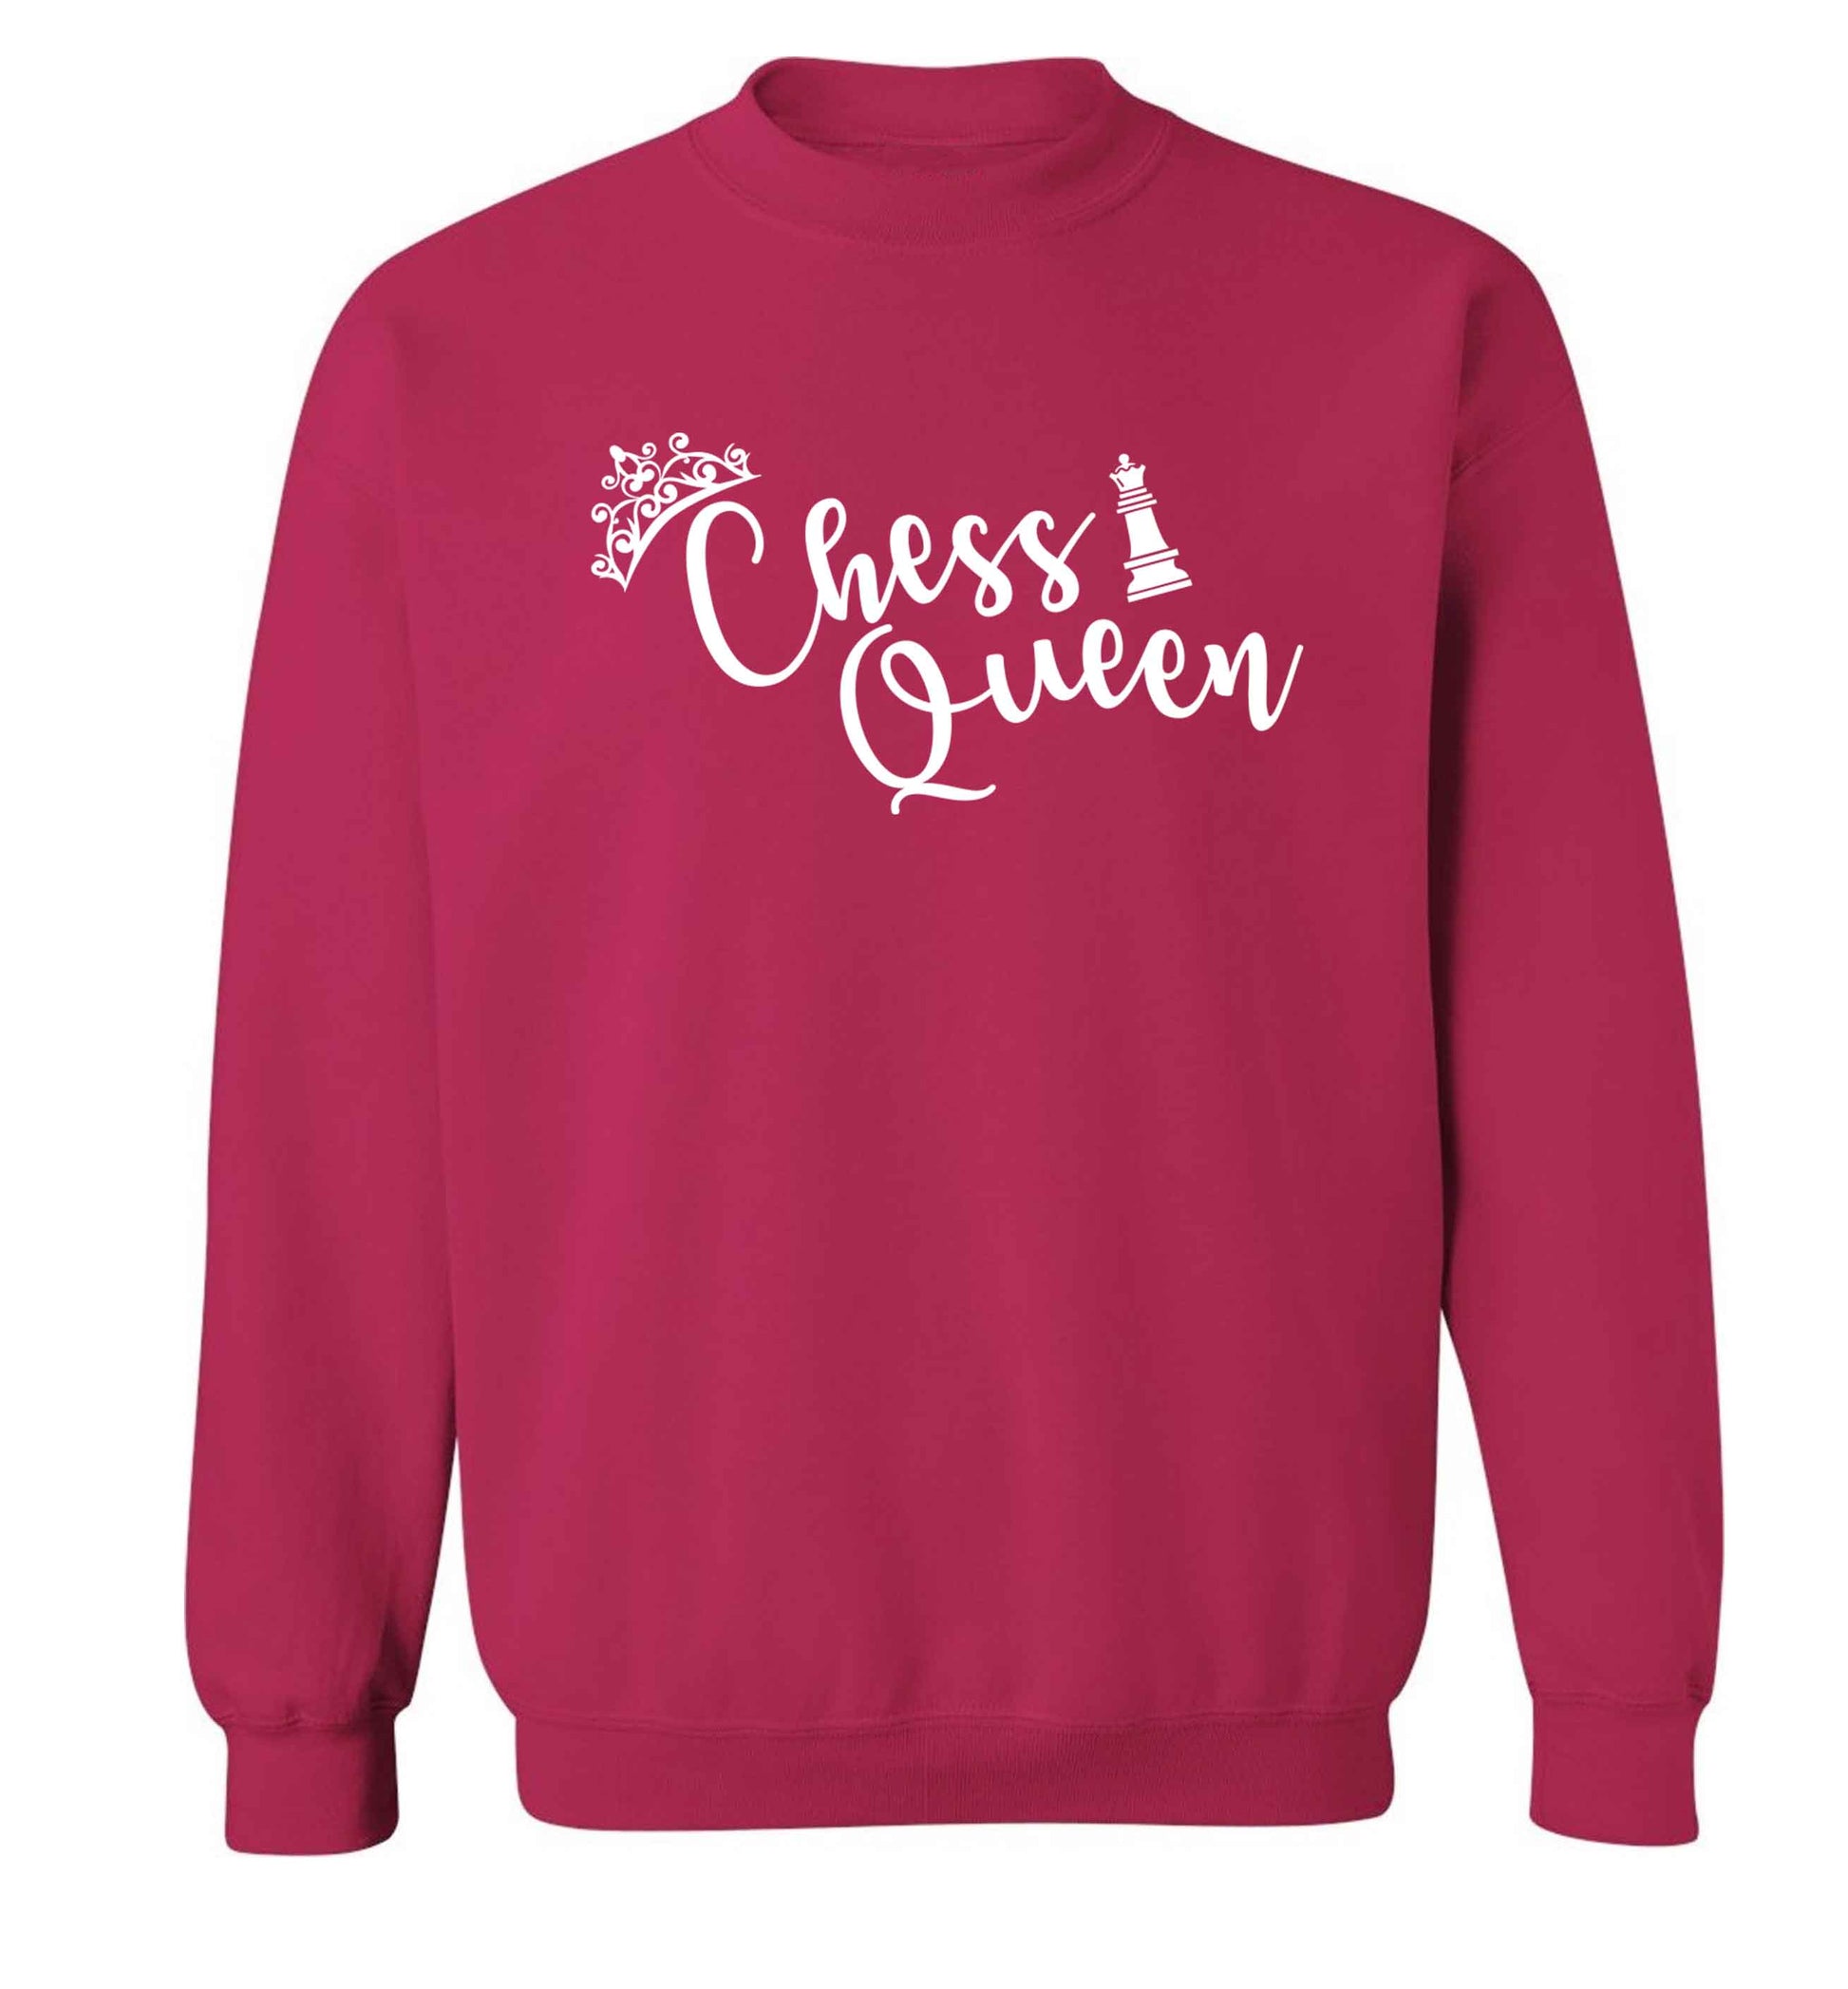 Pink chess queen  Adult's unisex pink Sweater 2XL